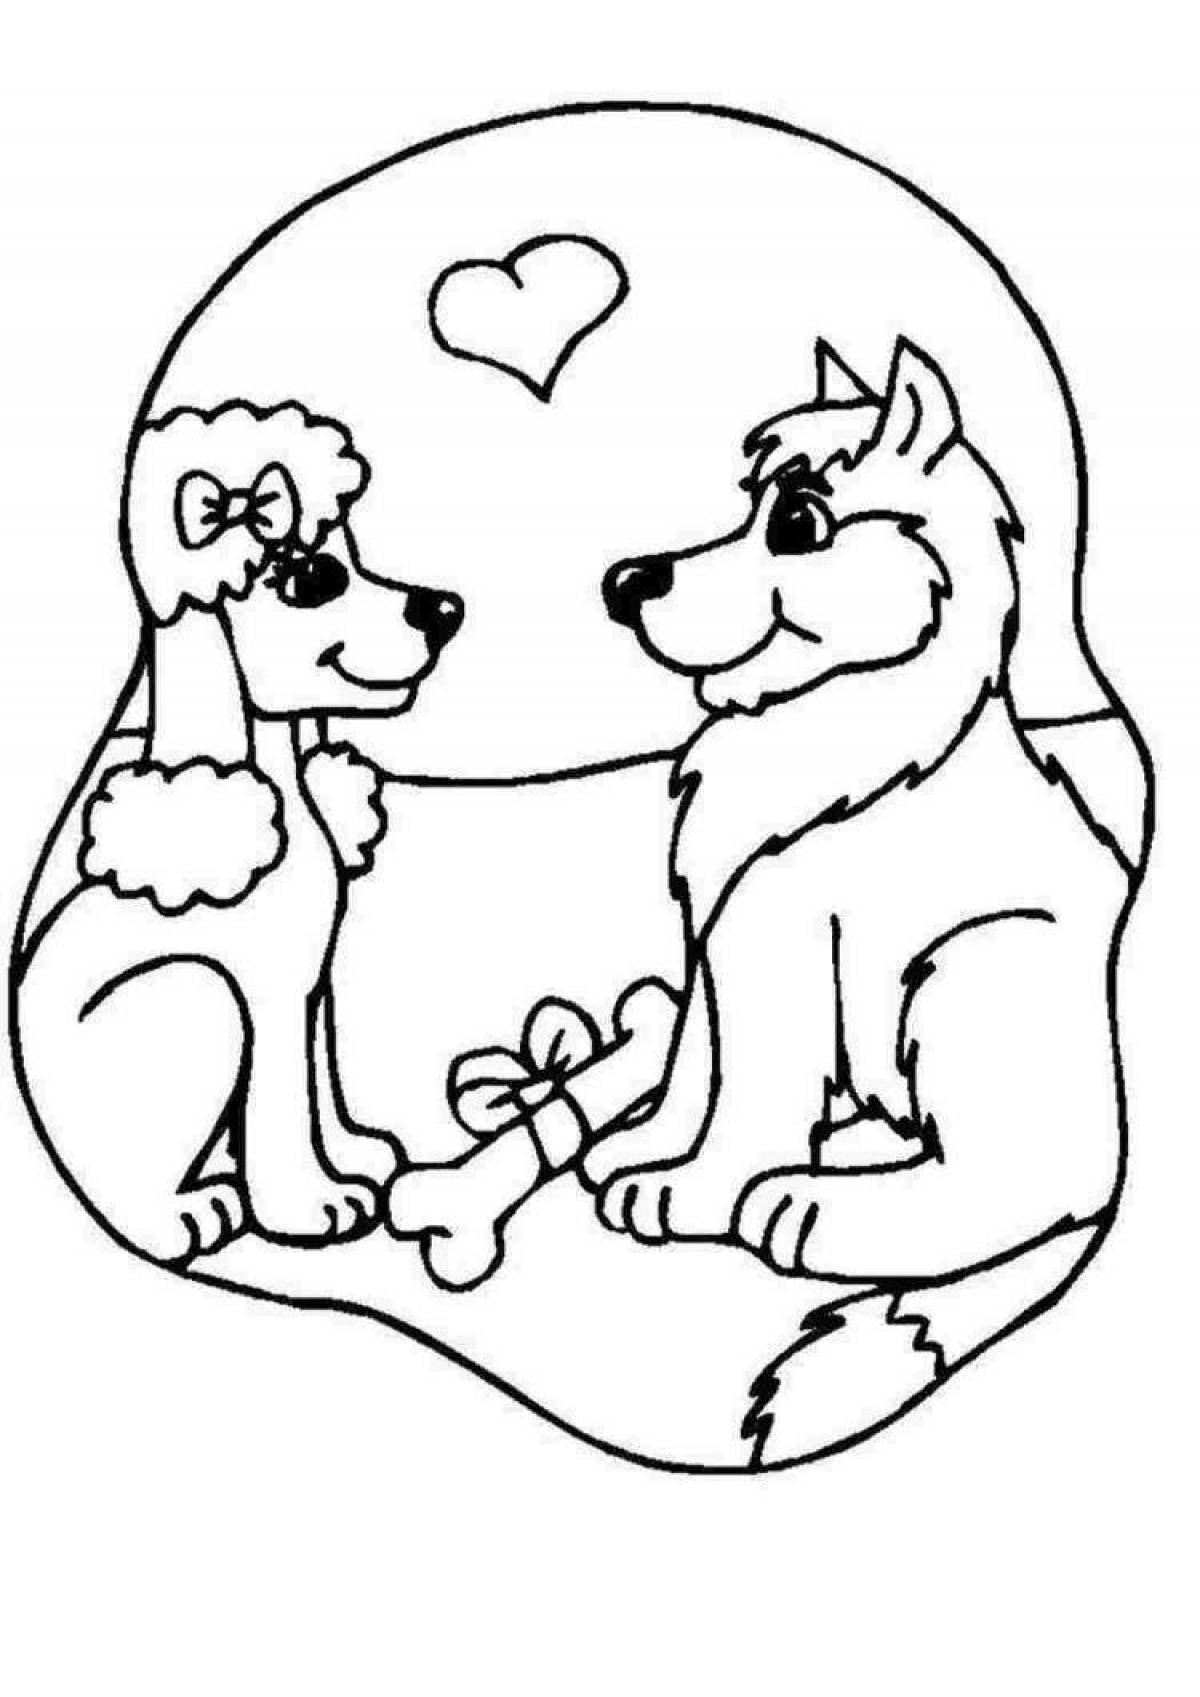 Fun cat and dog coloring pages for kids